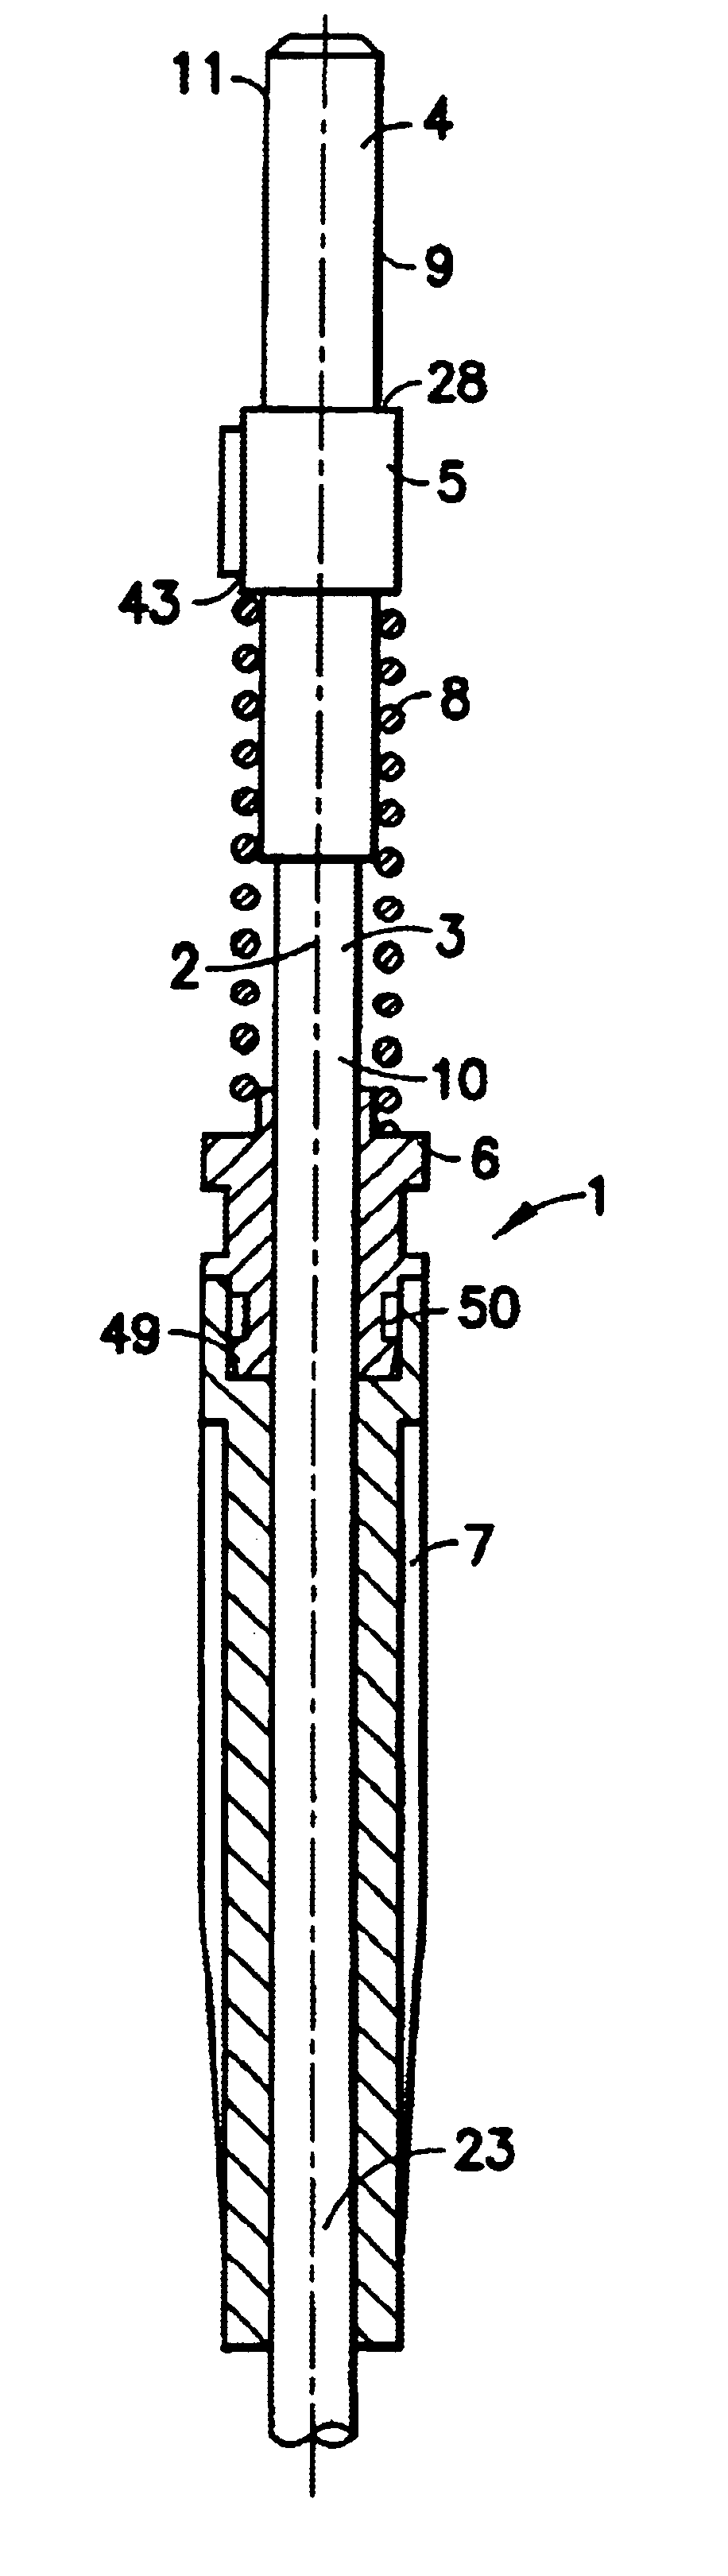 Easy-to-mount optical connector system